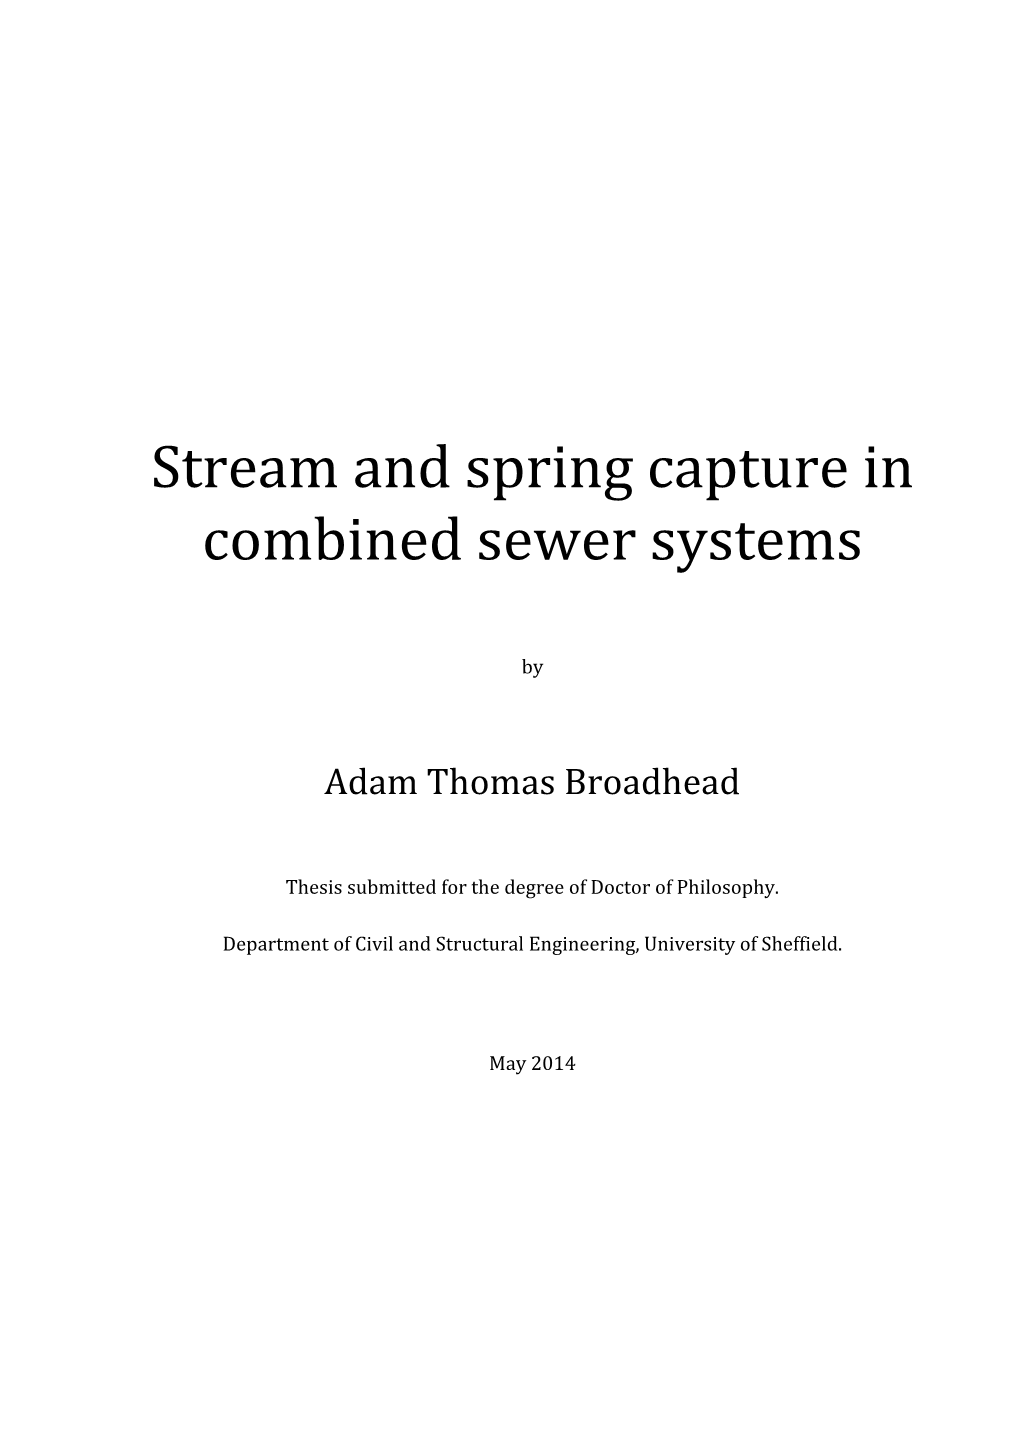 Stream and Spring Capture in Combined Sewer Systems